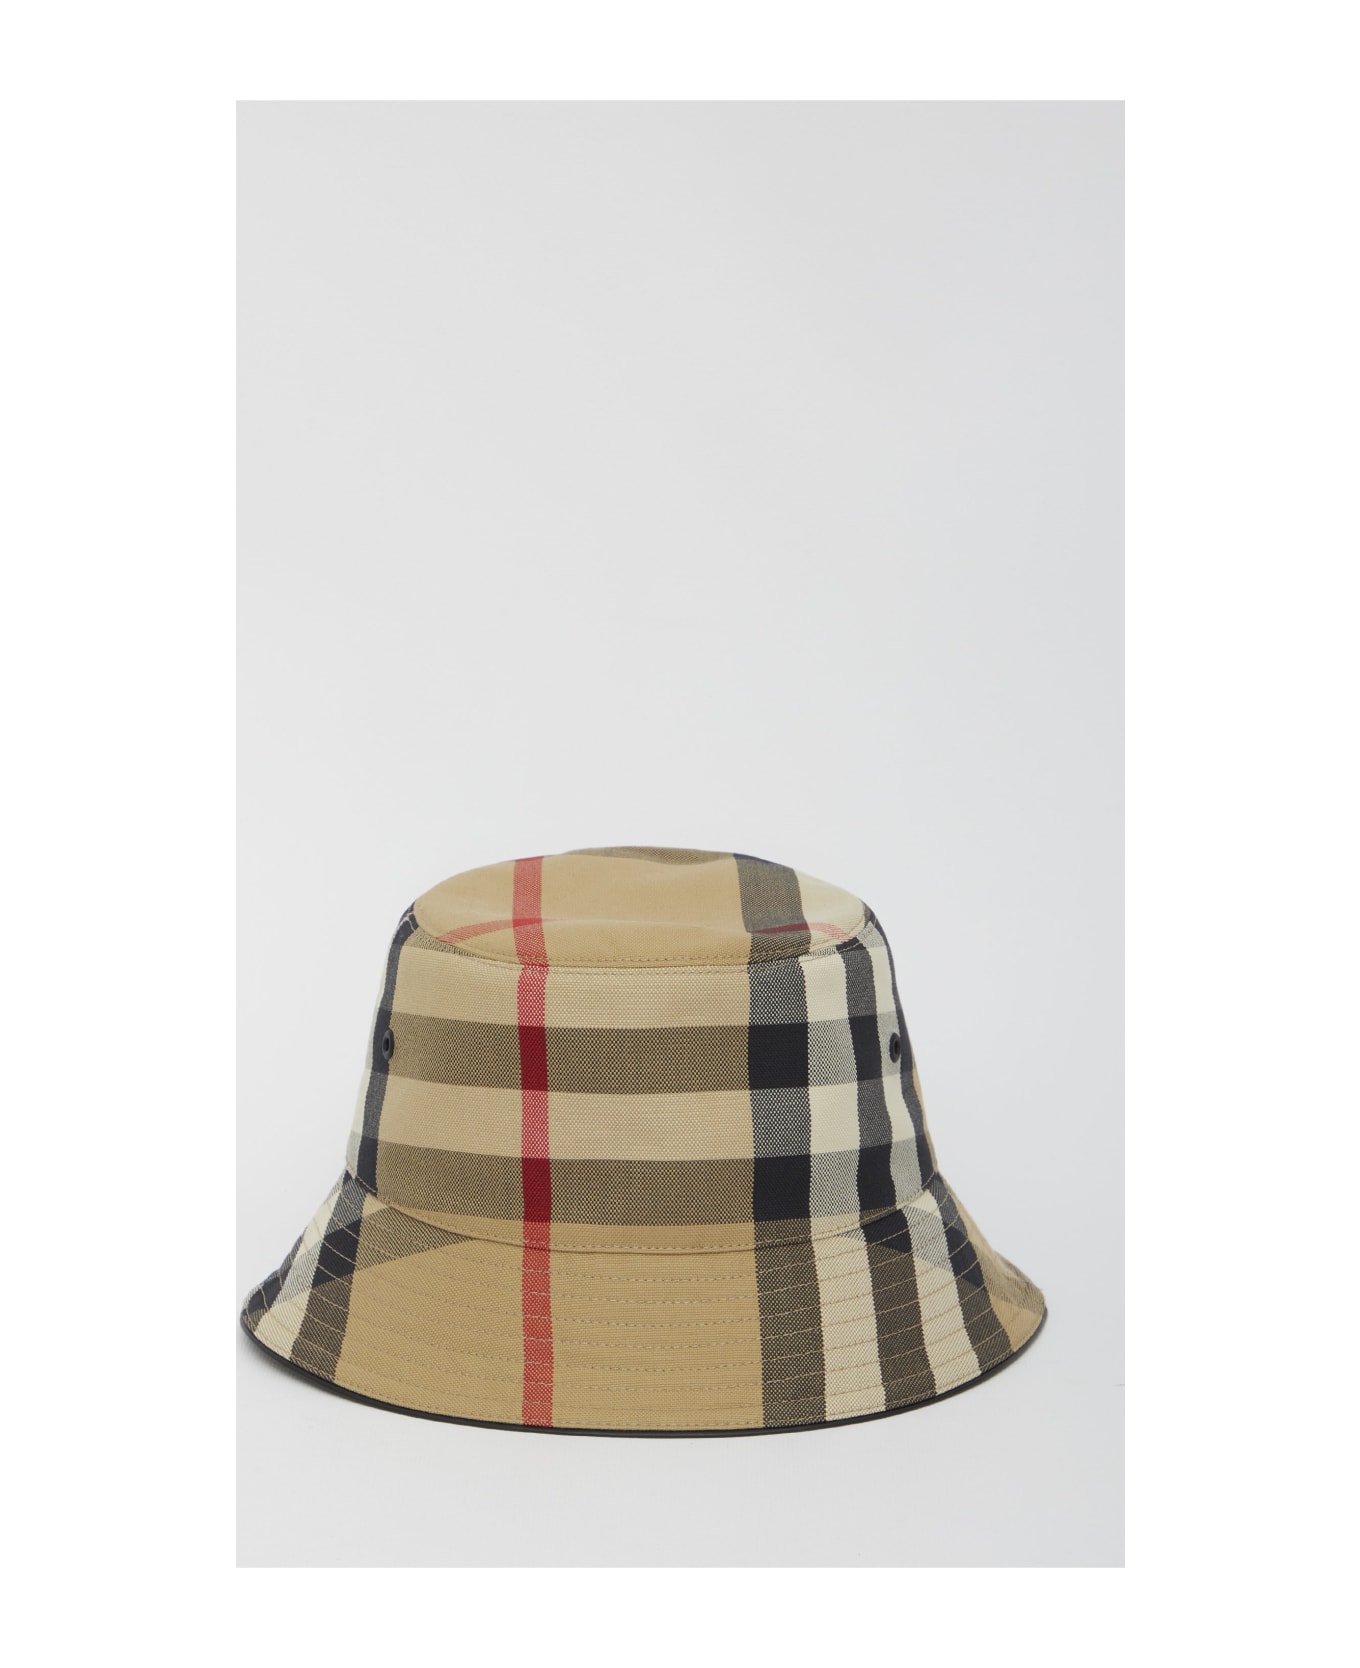 Burberry Exaggerated Check Bucket Hat - BEIGE